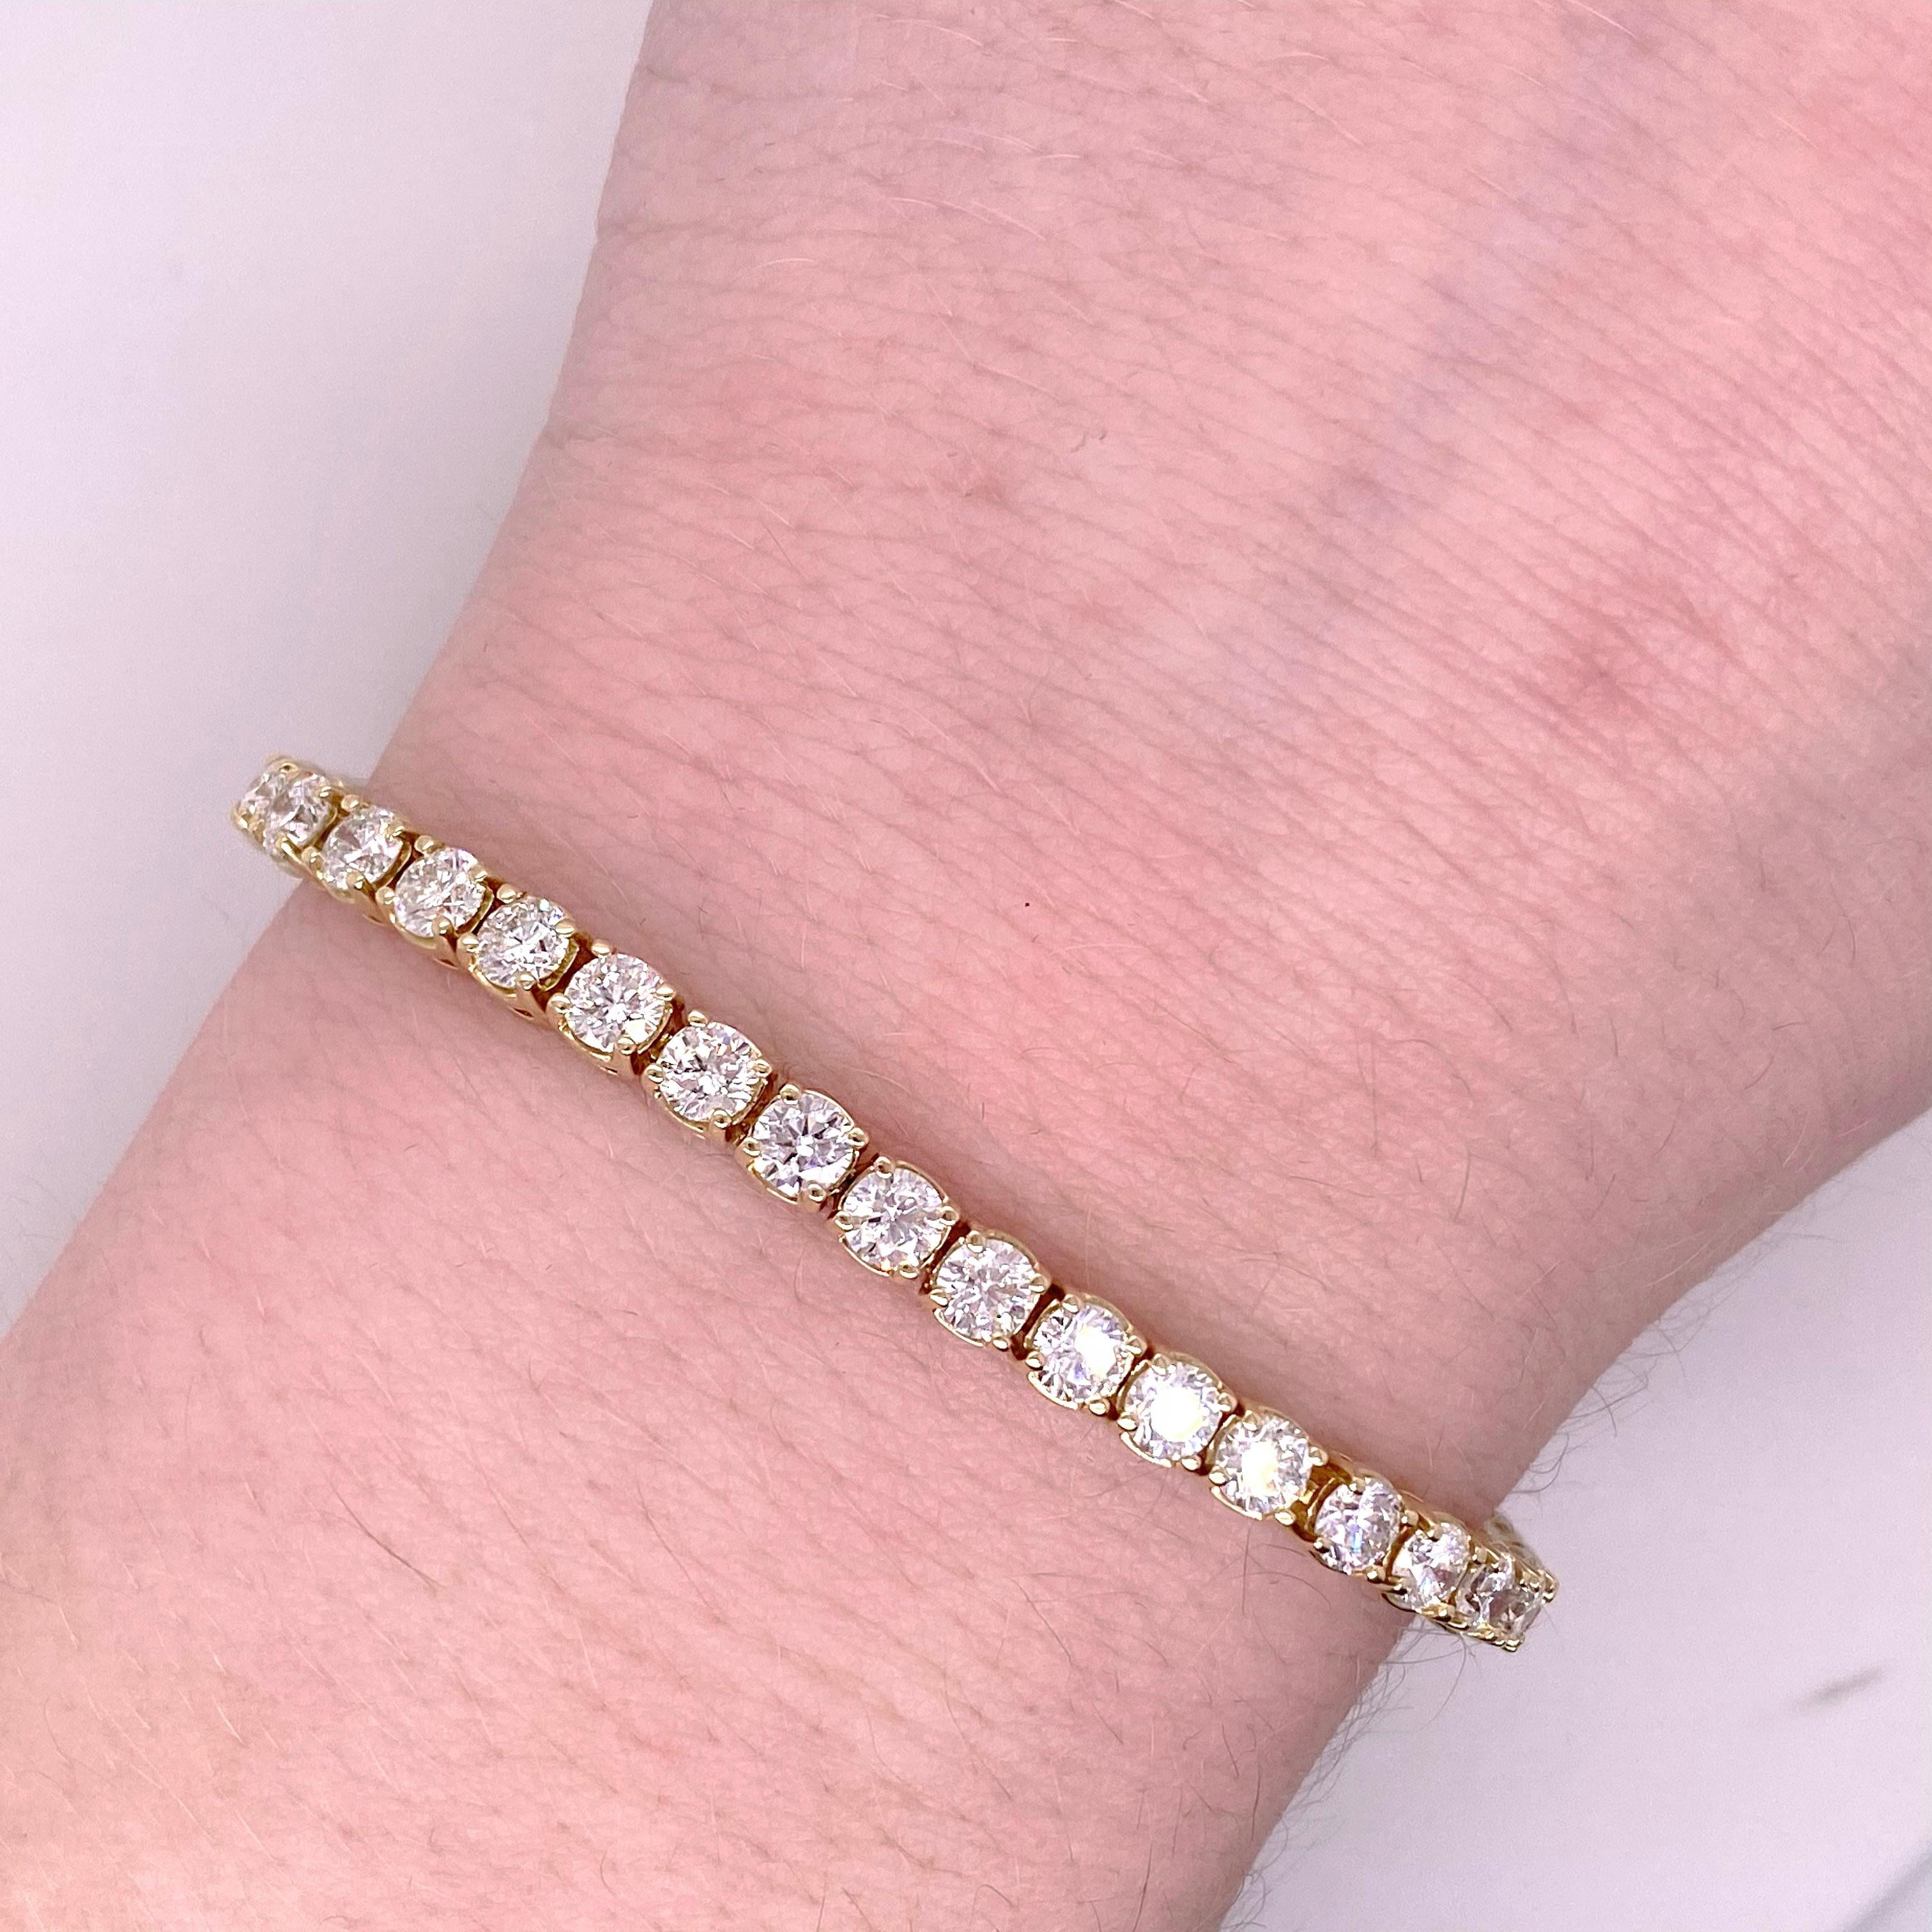 This diamond tennis bracelet has 7 carats of total diamond weight!  This four prong tennis bracelet is the perfect size so that you can see the diamonds and the gold is nice and sturdy and fine if you want to wear the bracelet everyday!  The yellow